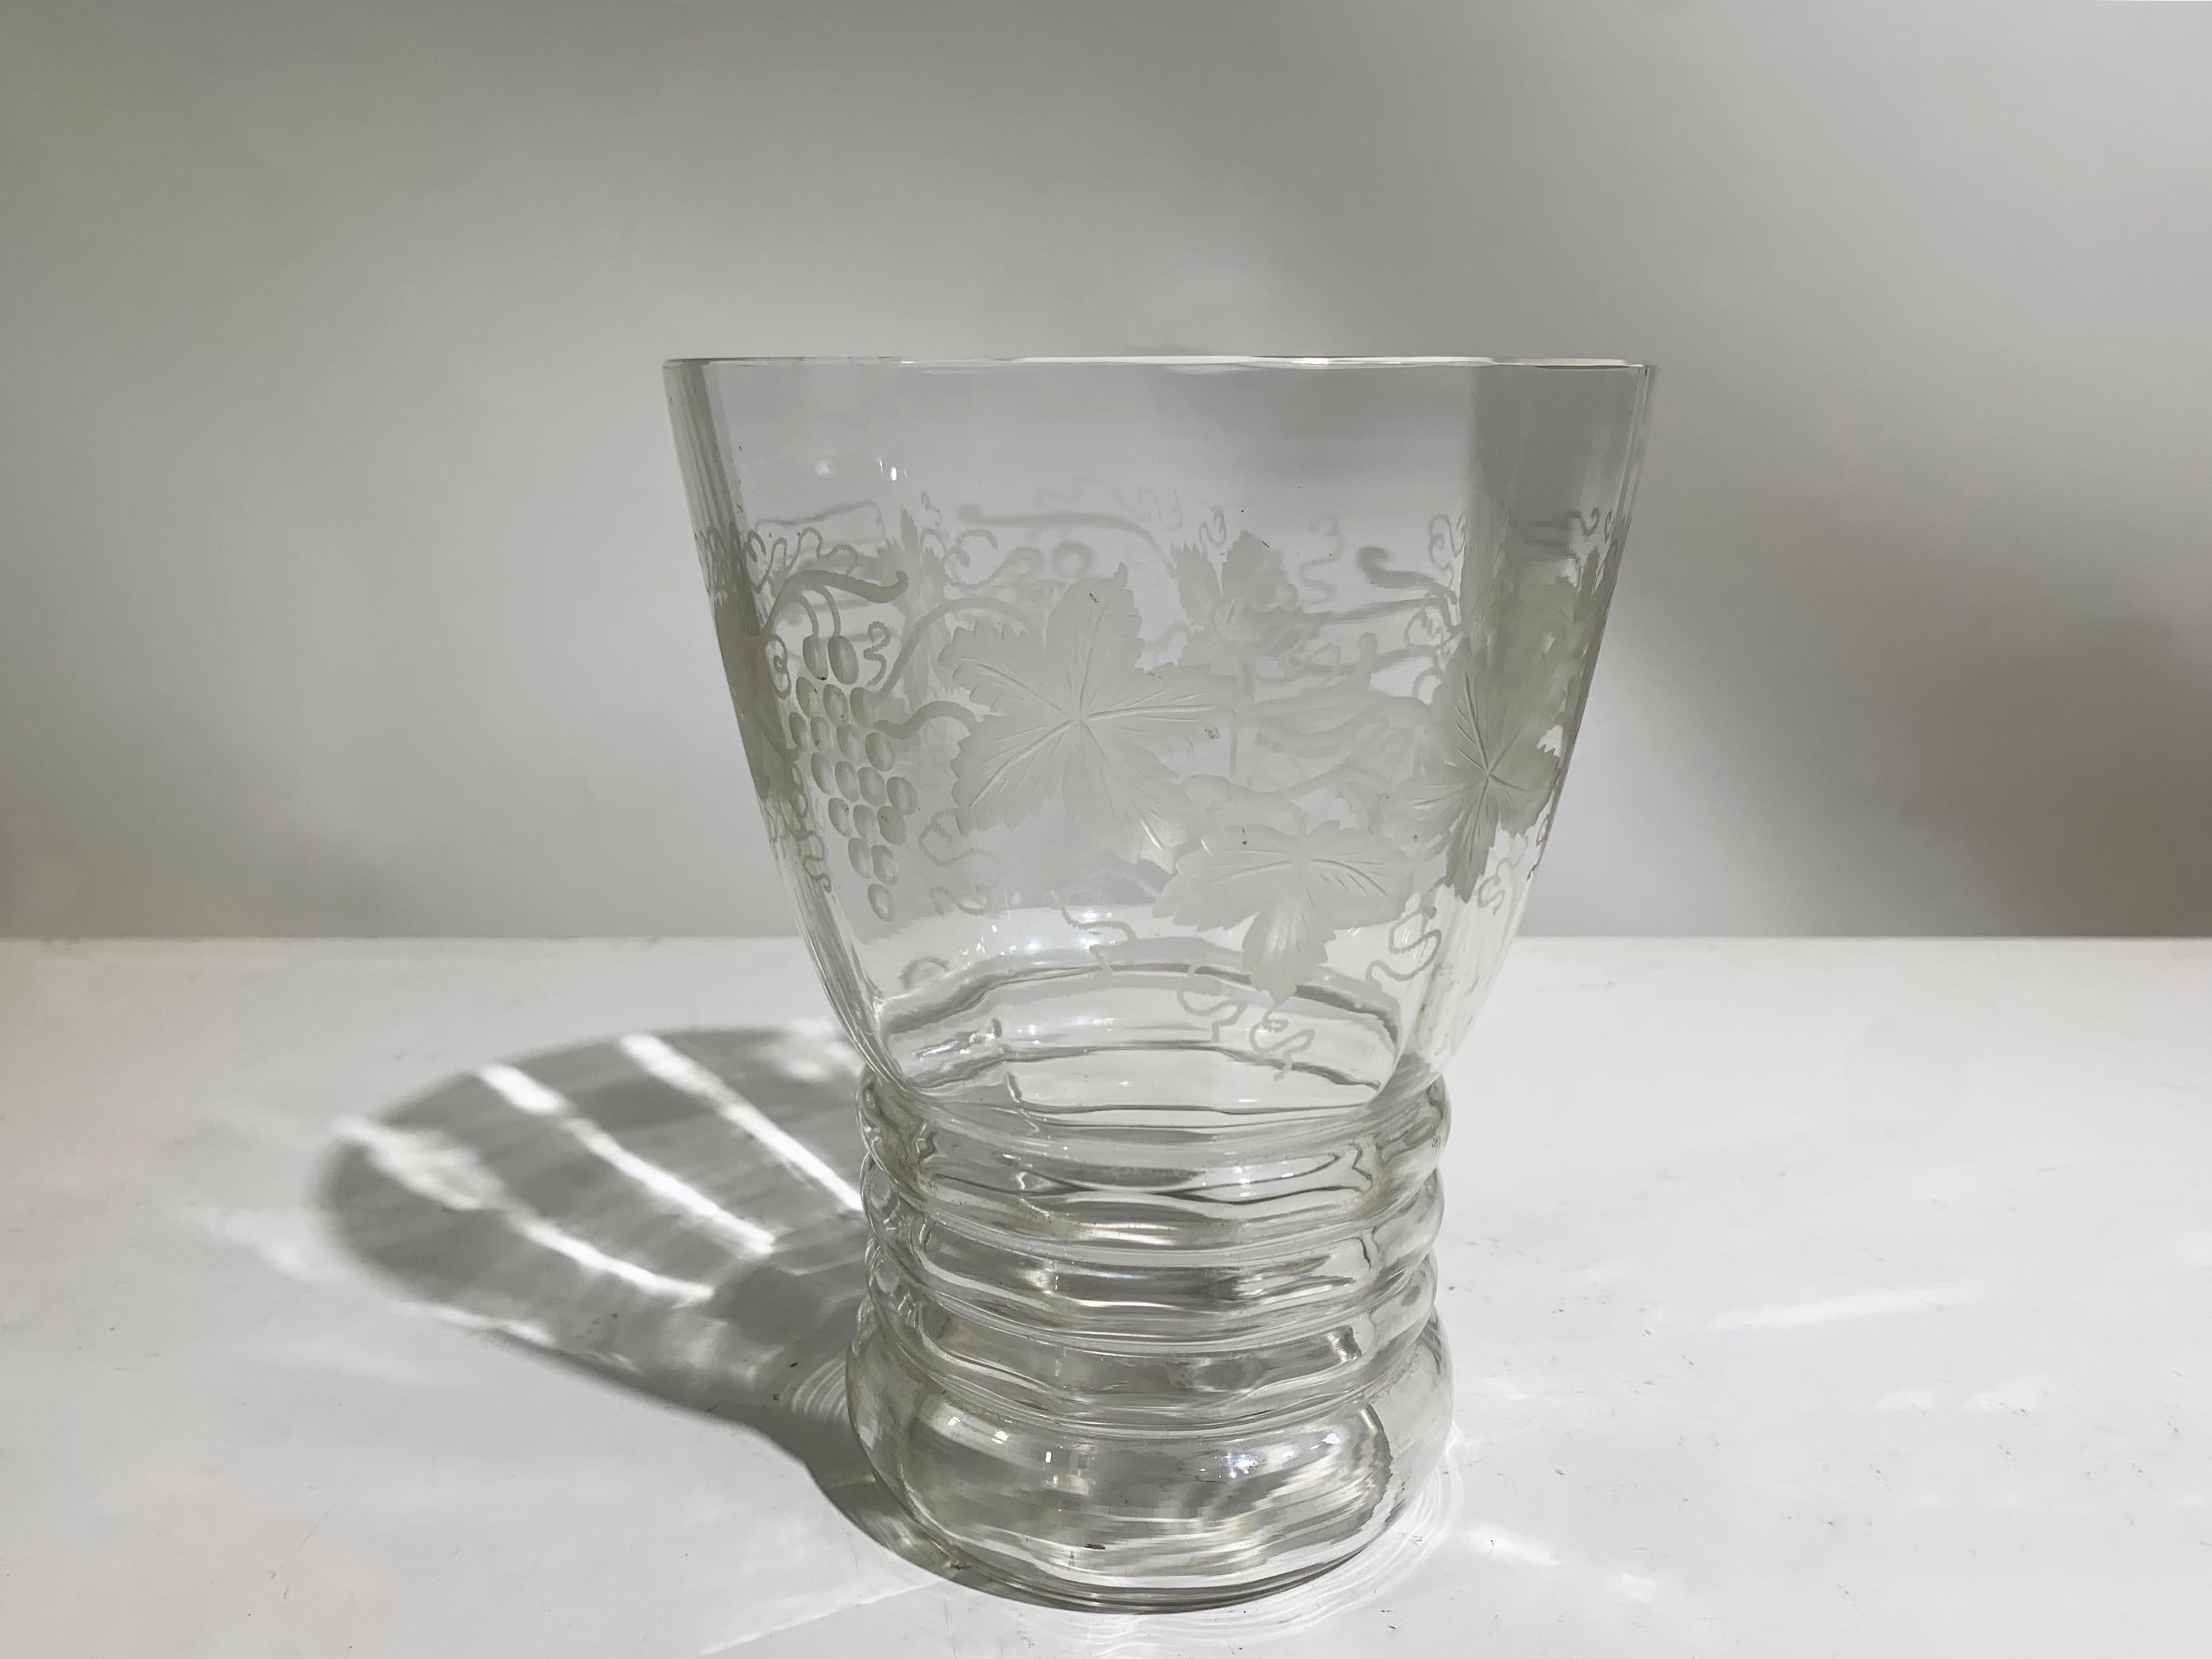 Vintage French crystal vase adorned with delicate acid etching, elegantly featuring a motif of grapes and grape leaves encircling the vase.
